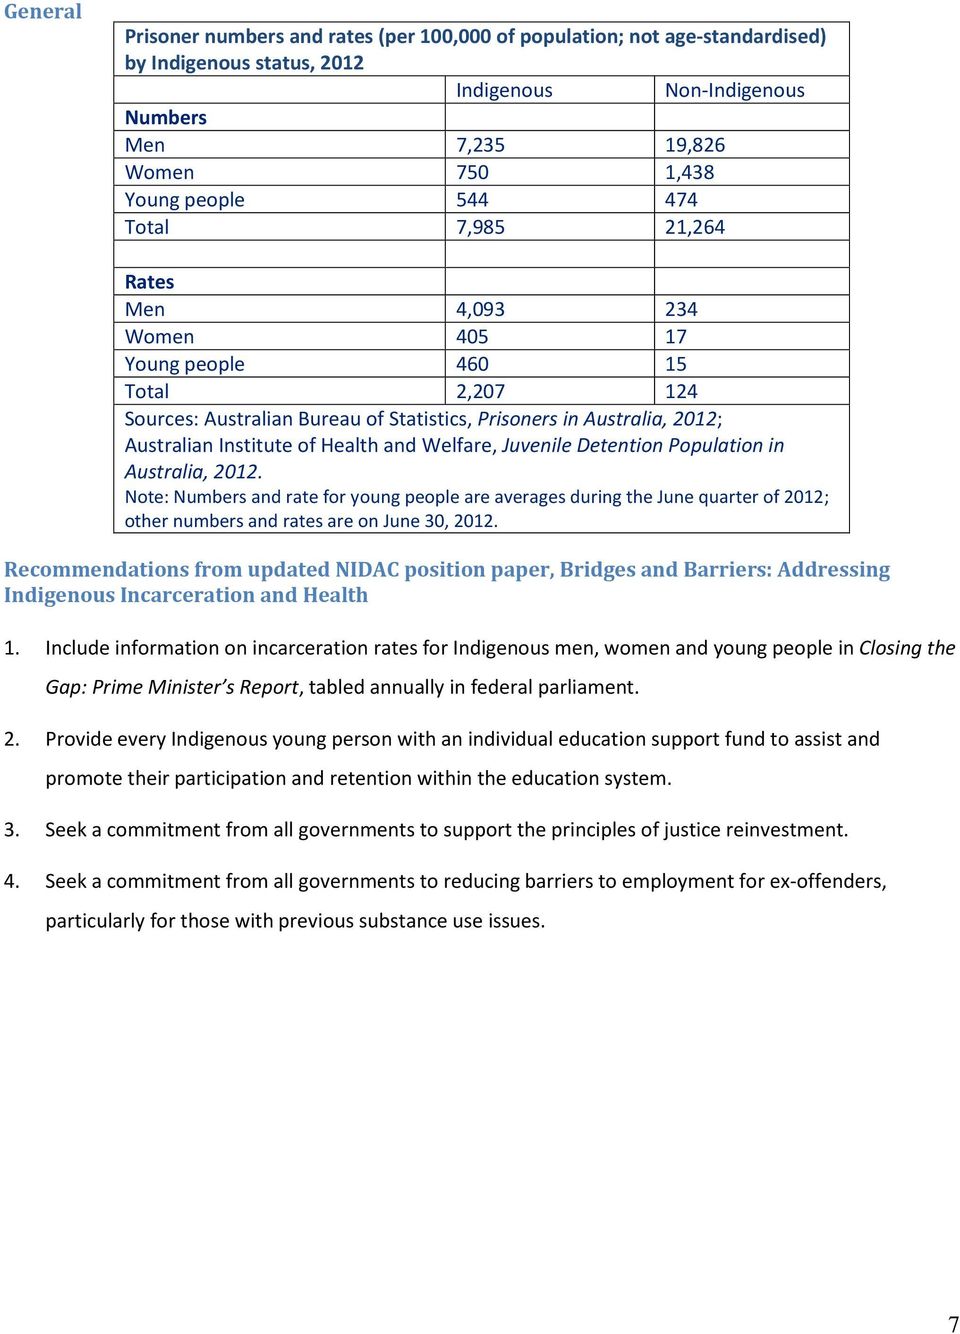 Welfare, Juvenile Detention Population in Australia, 2012. Note: Numbers and rate for young people are averages during the June quarter of 2012; other numbers and rates are on June 30, 2012.